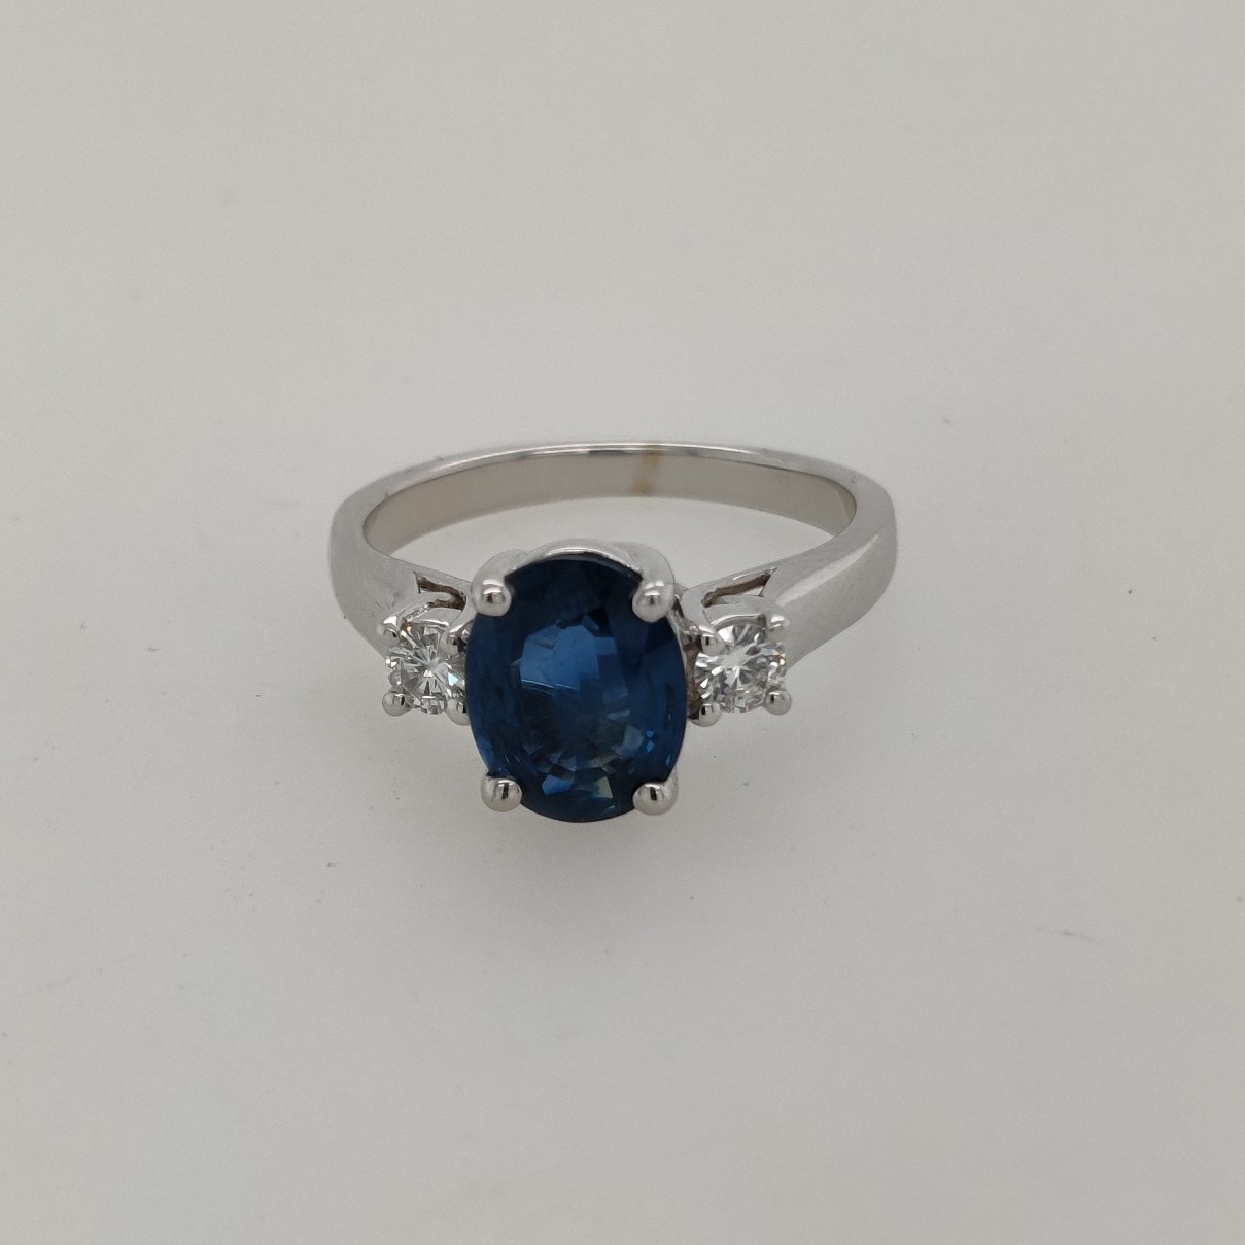 18k White Gold Oval Sapphire Ring with 2 Round Diamond Accents Size 6.75